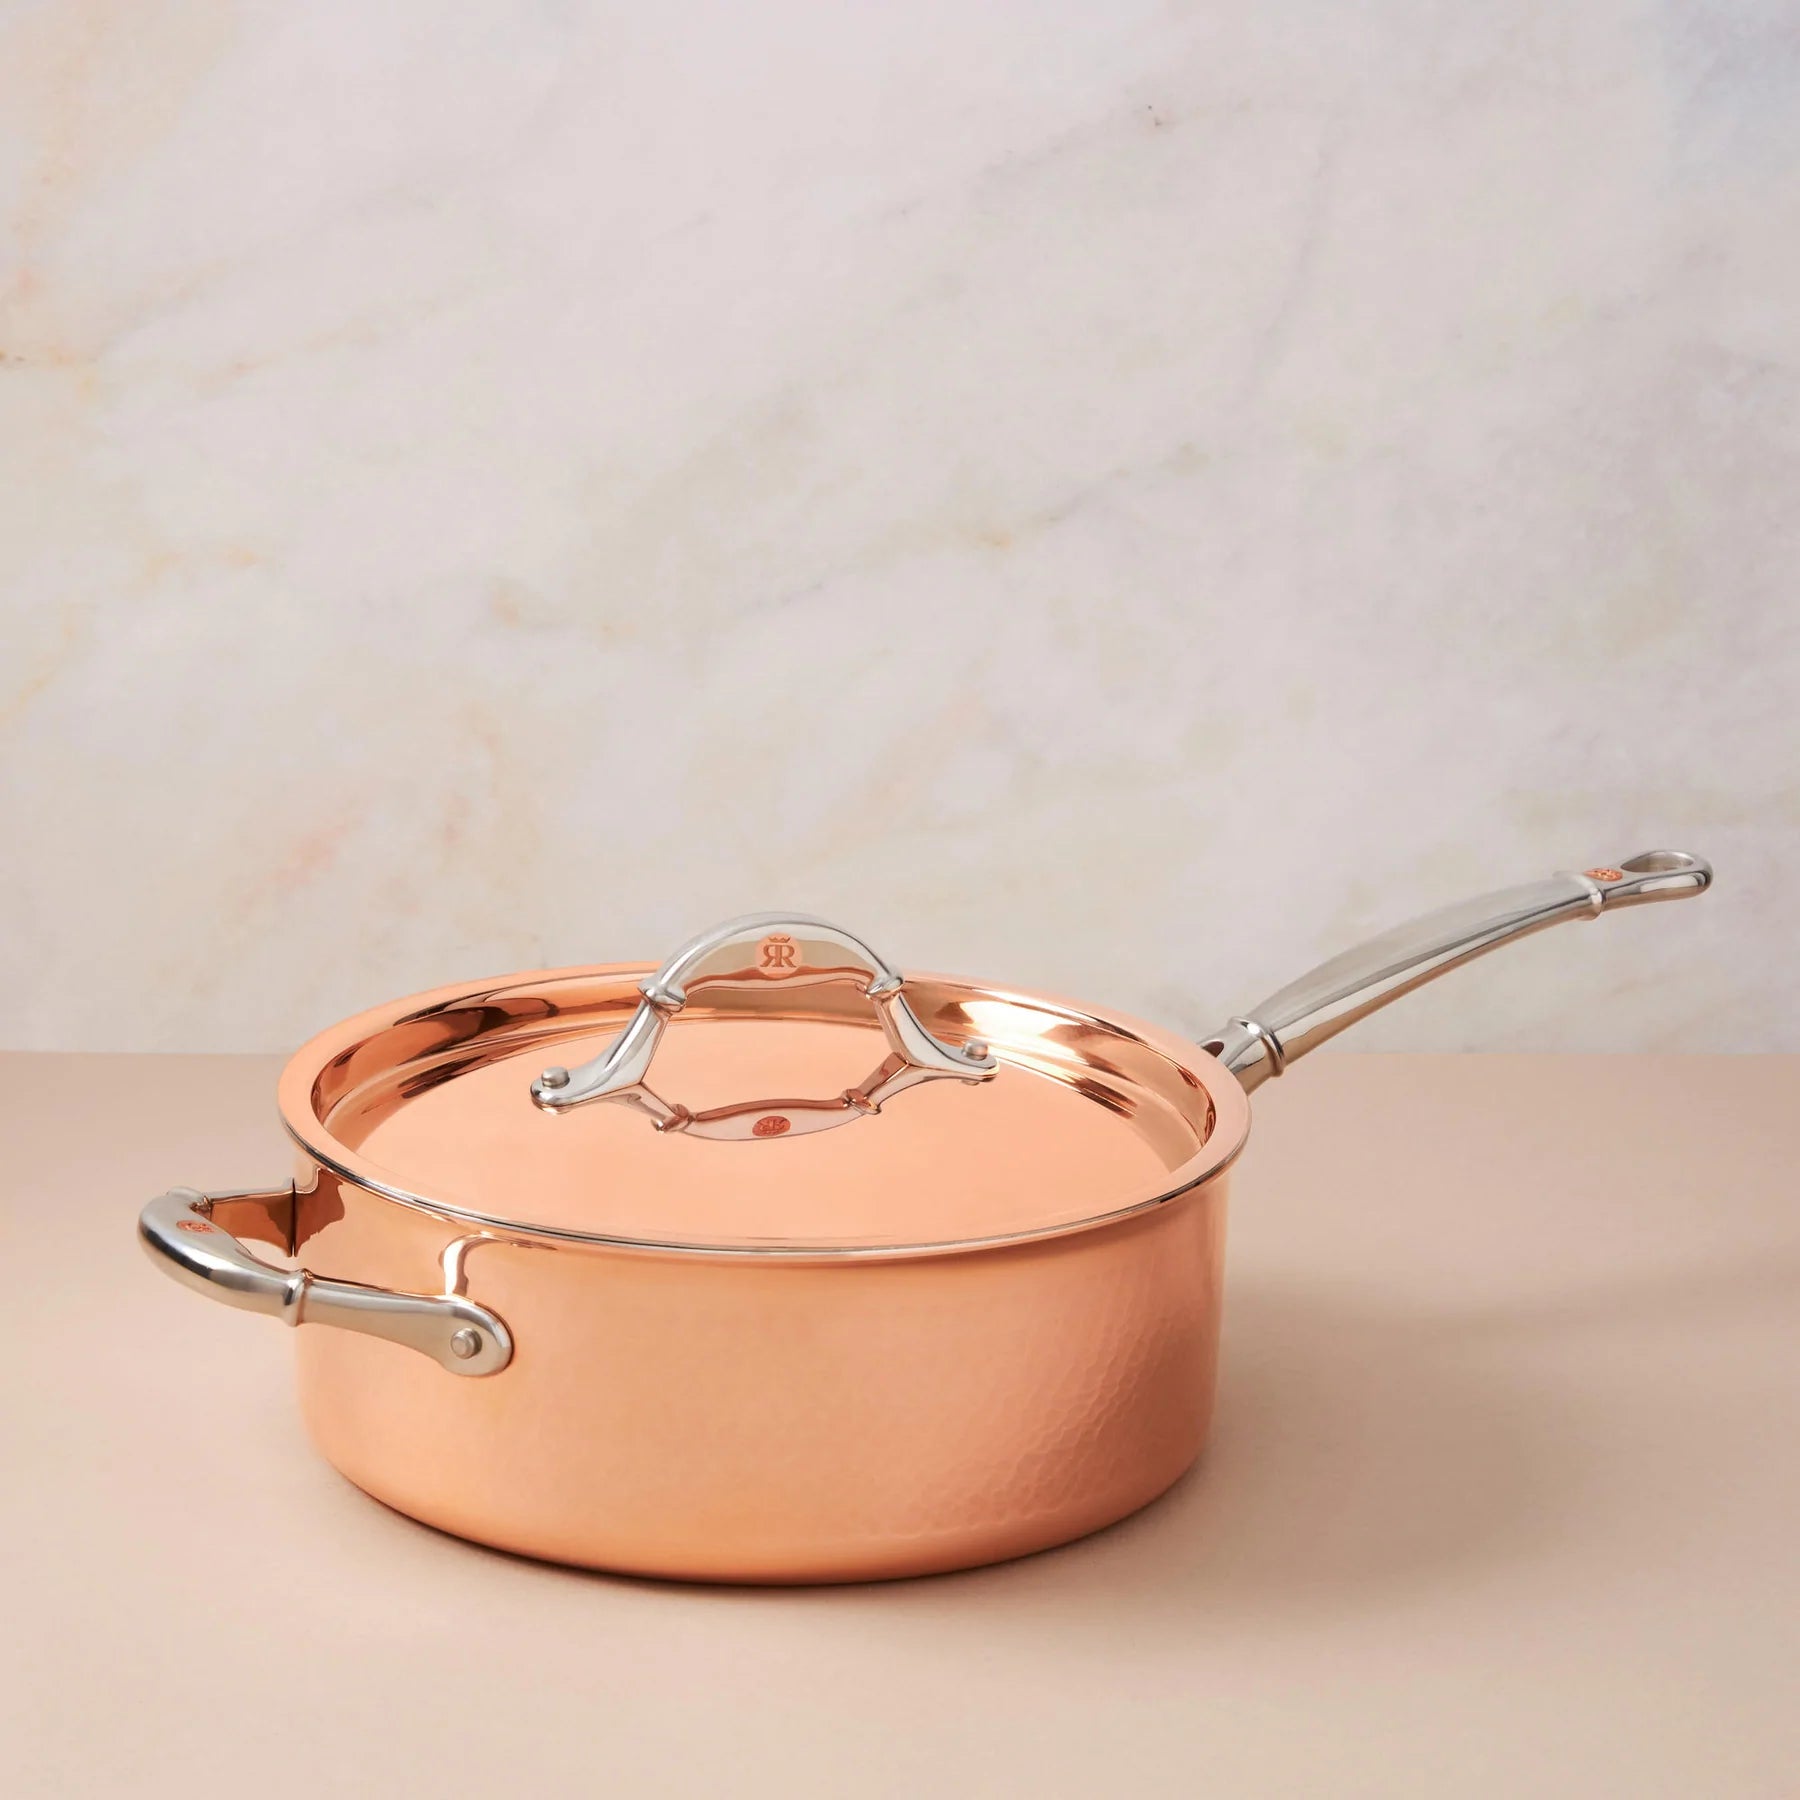 https://cdn.shopify.com/s/files/1/0580/1888/9780/files/Ruffoni-Symphoria-Cupra-10-4-Quart-Hammered-Copper-Saute-Pan-With-Copper-Clad-Lid-and-Riveted-Stainless-Steel-Handle-Inlaid-With-Signature-Copper-Coin.webp?v=1685838943